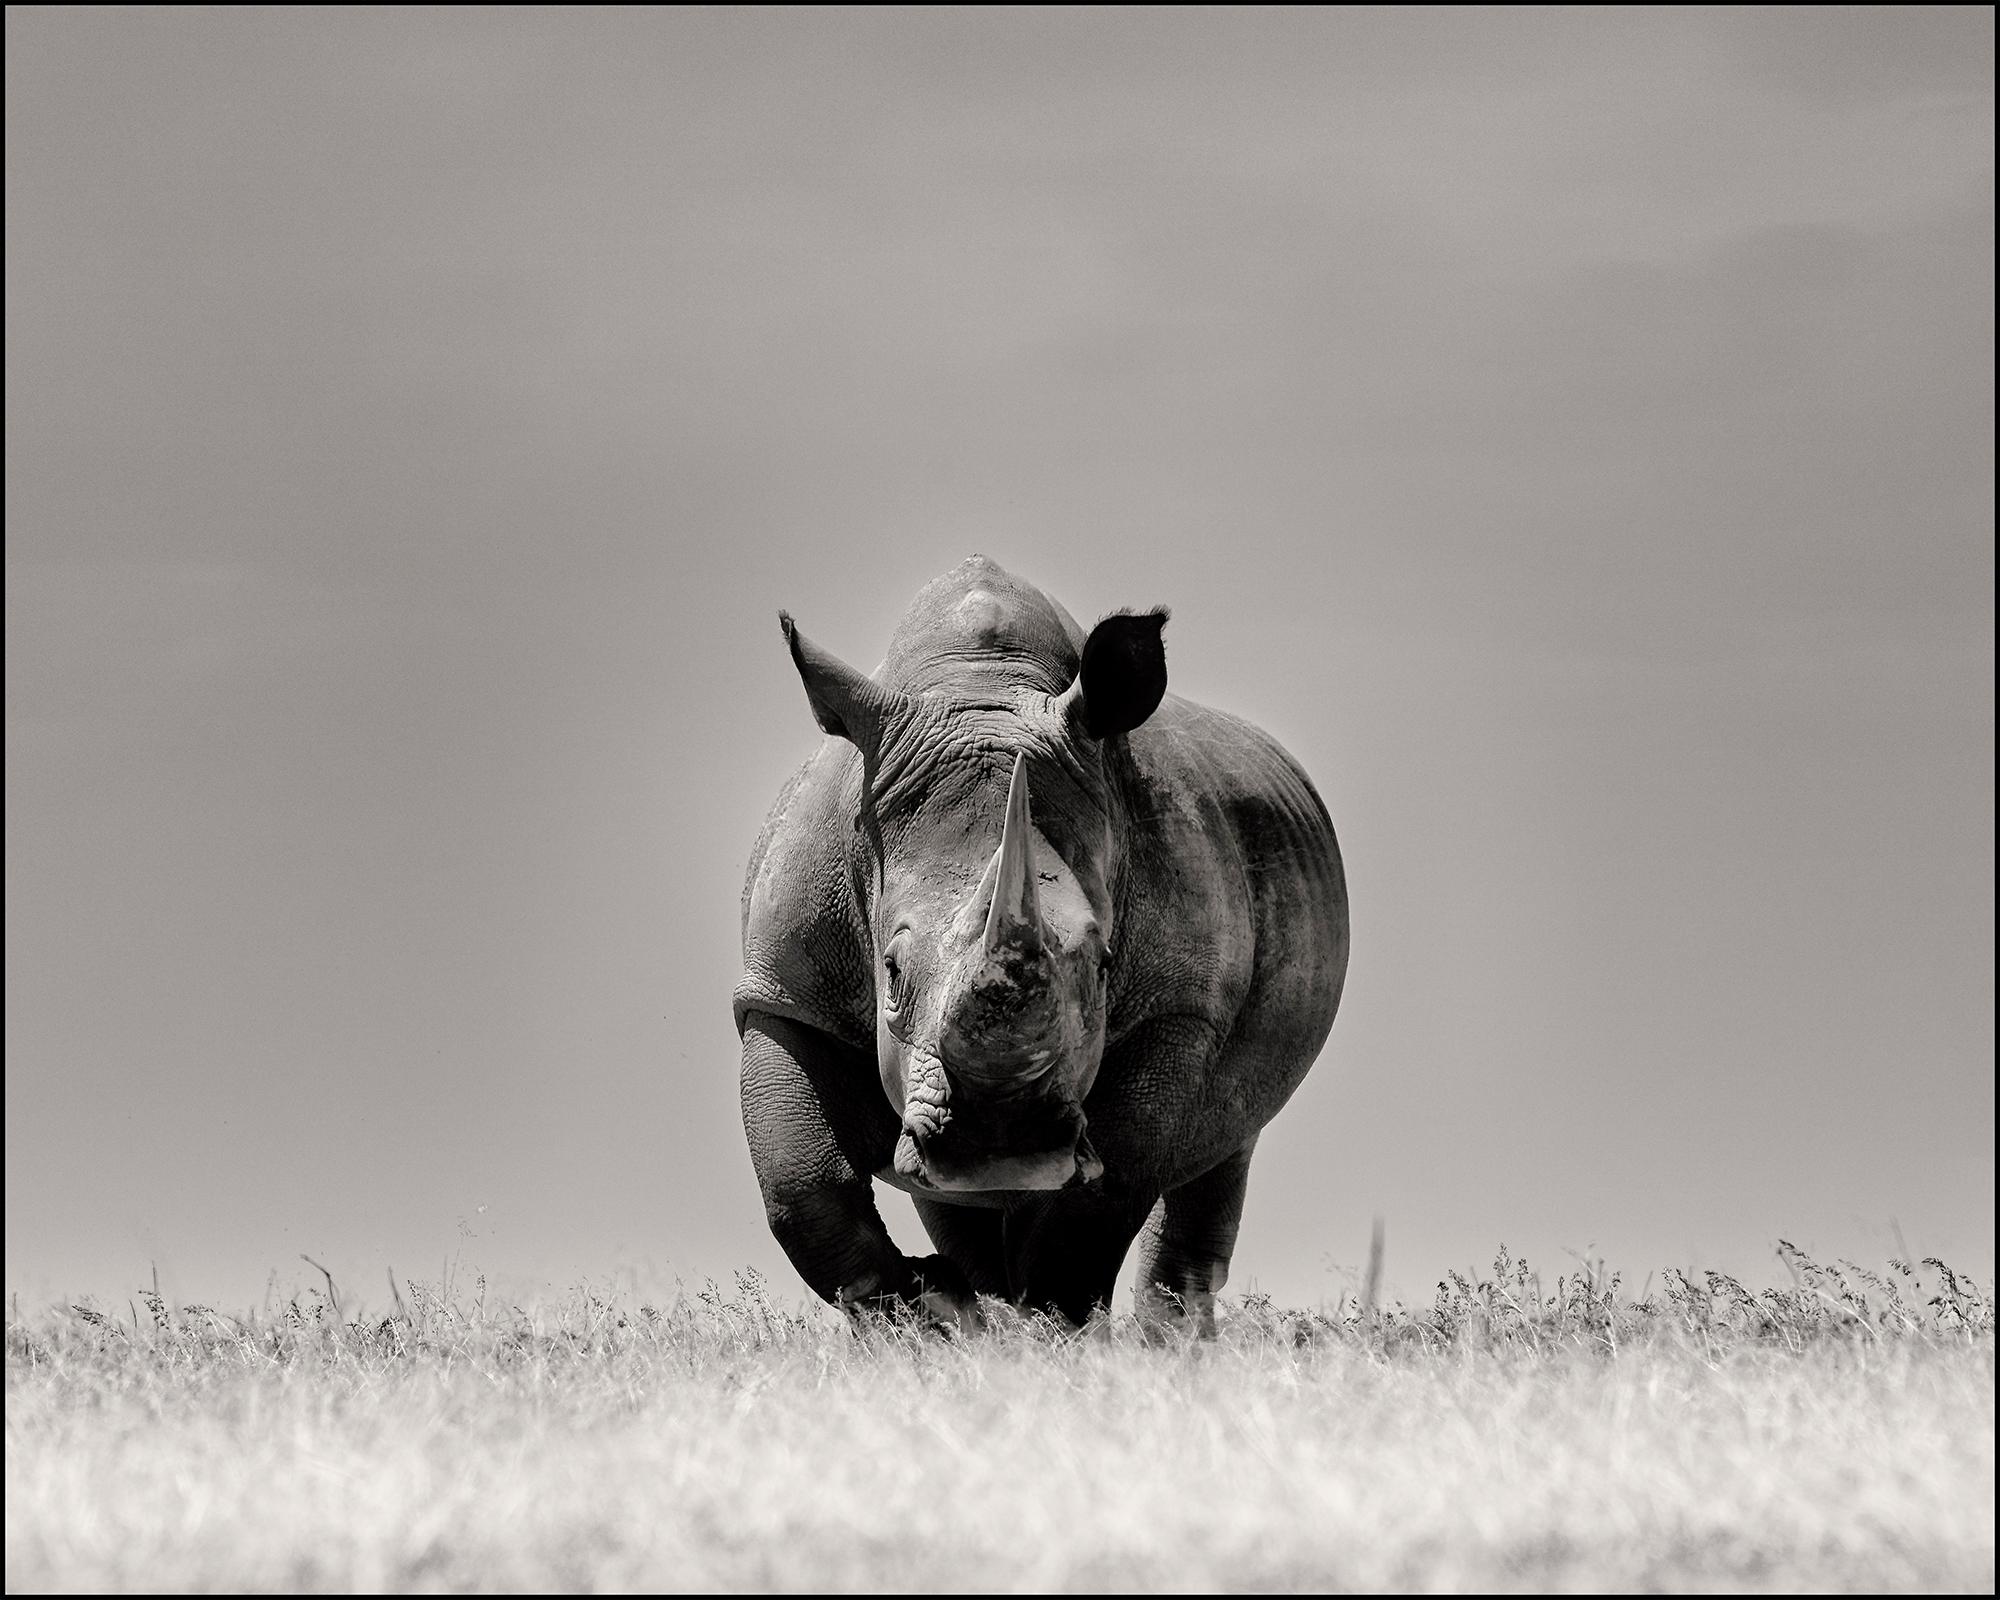 Joachim Schmeisser Black and White Photograph - Two seconds left, animal, wildlife, black and white photography, rhino, africa